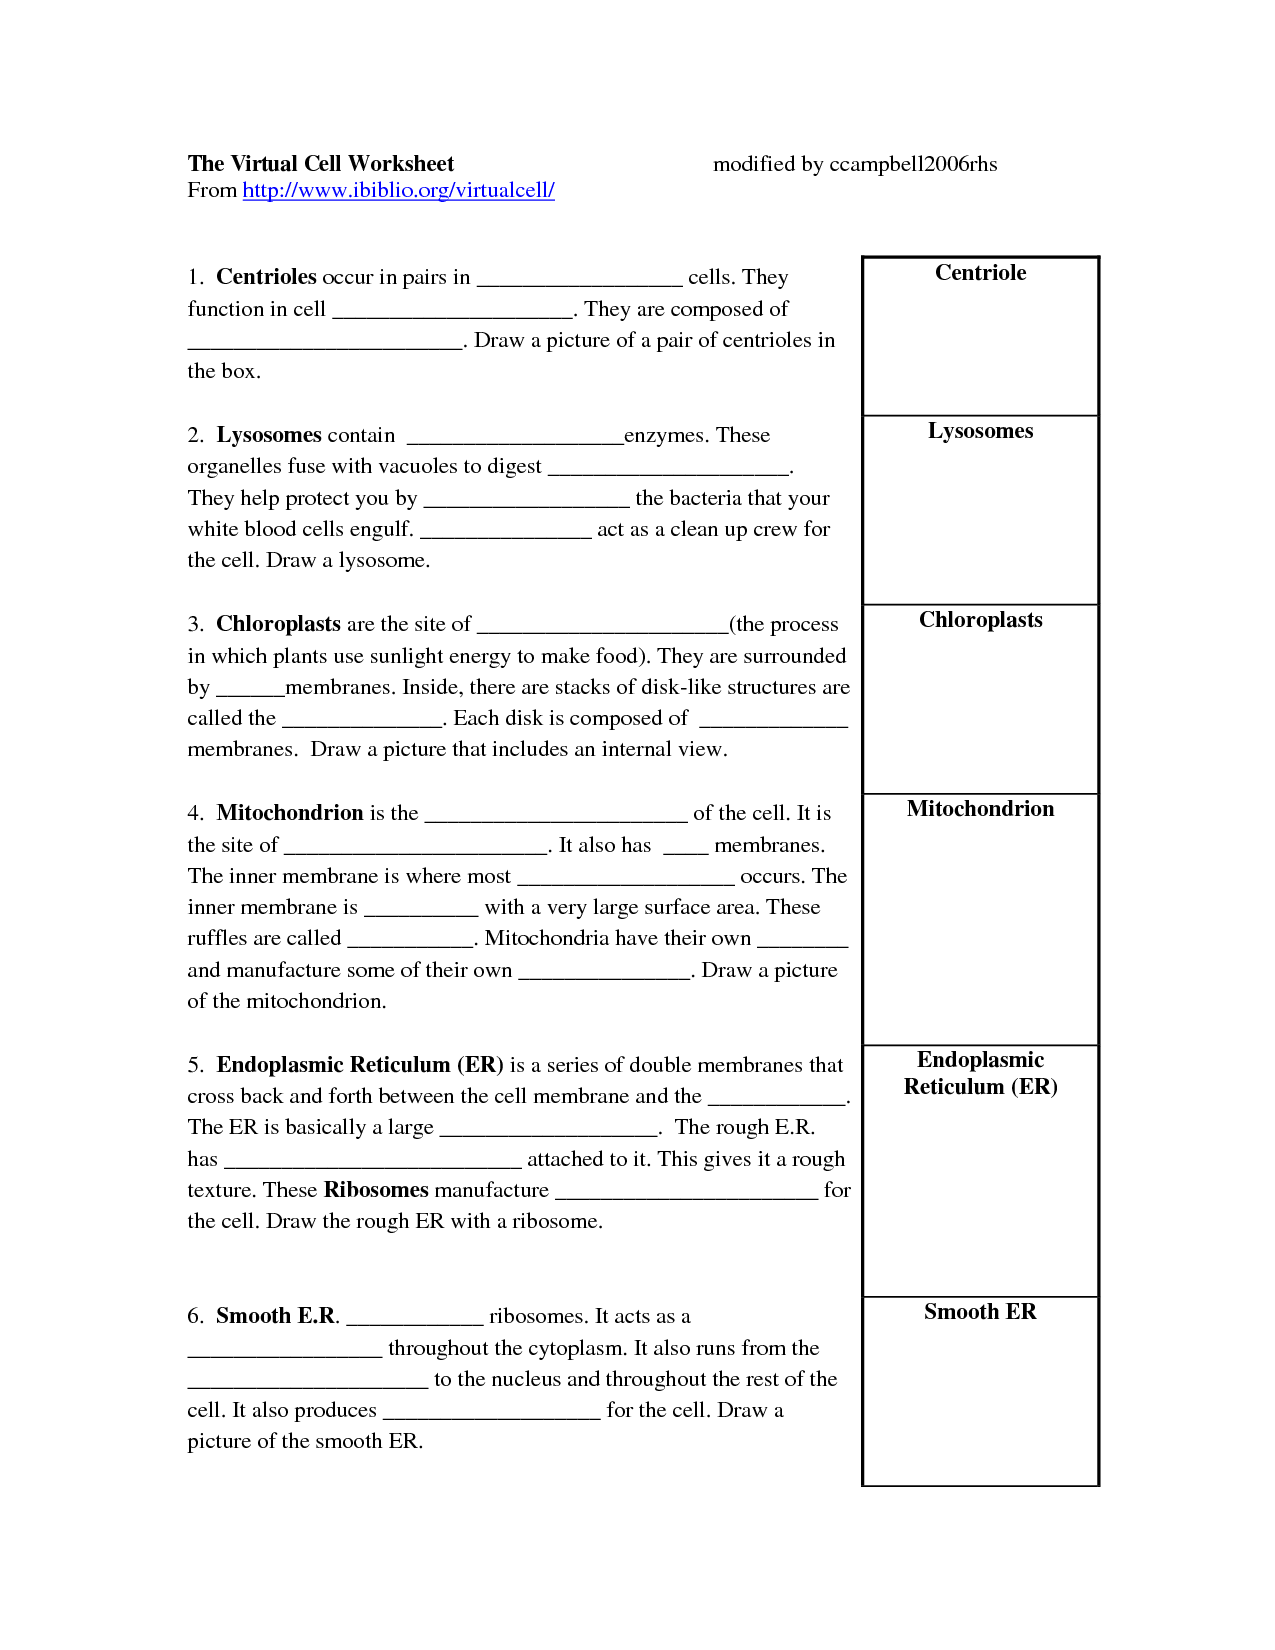 15-best-images-of-blood-cells-and-functions-worksheets-blood-cells-worksheet-virtual-cell